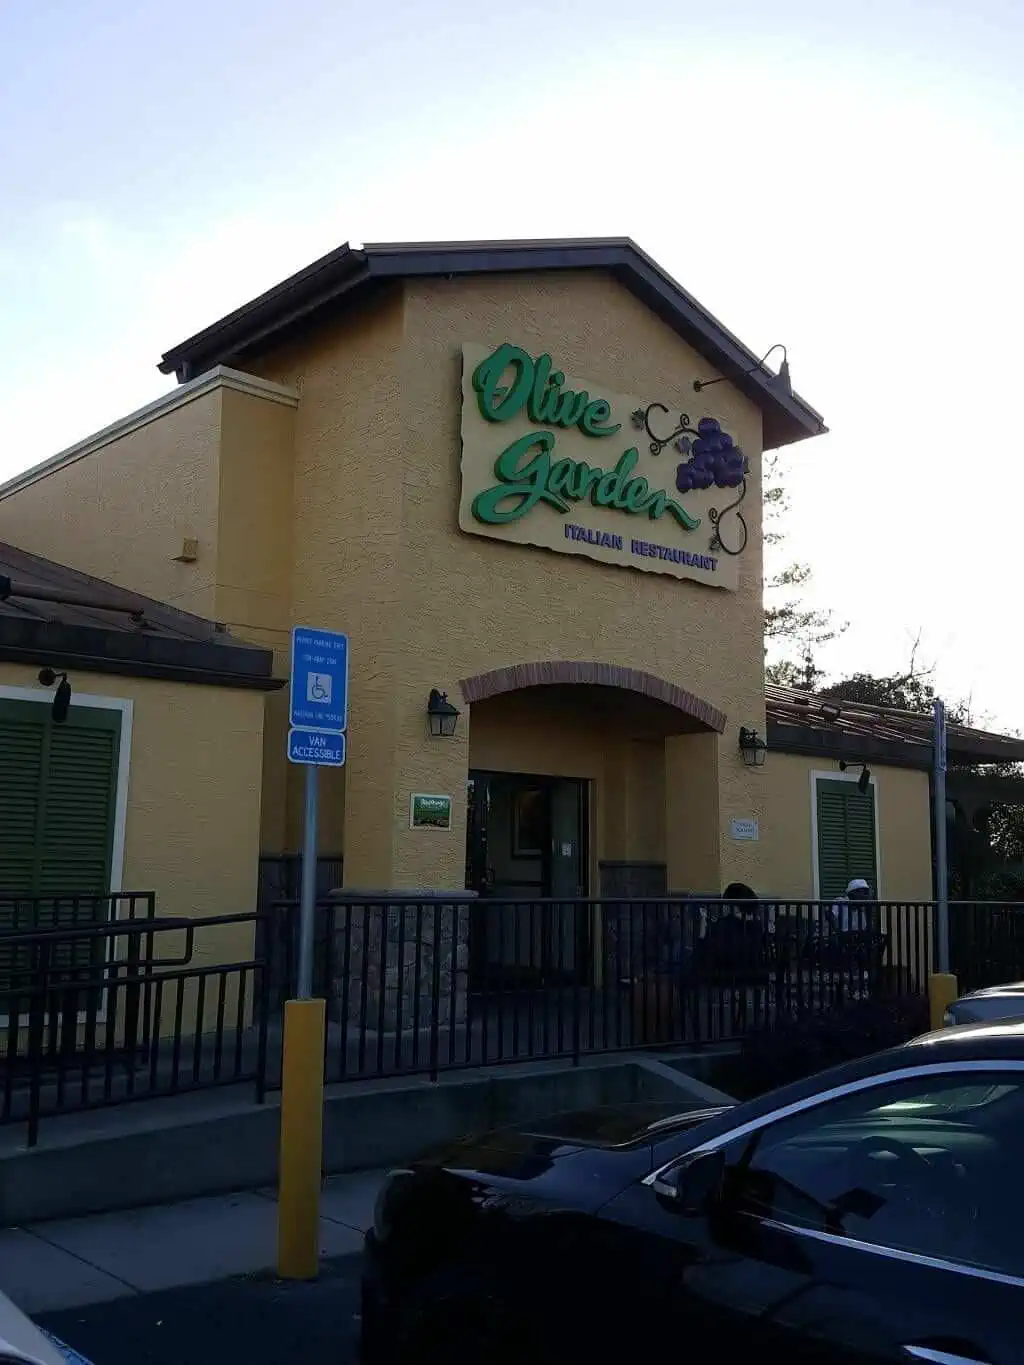 Two New Olive Gardens For The Csra